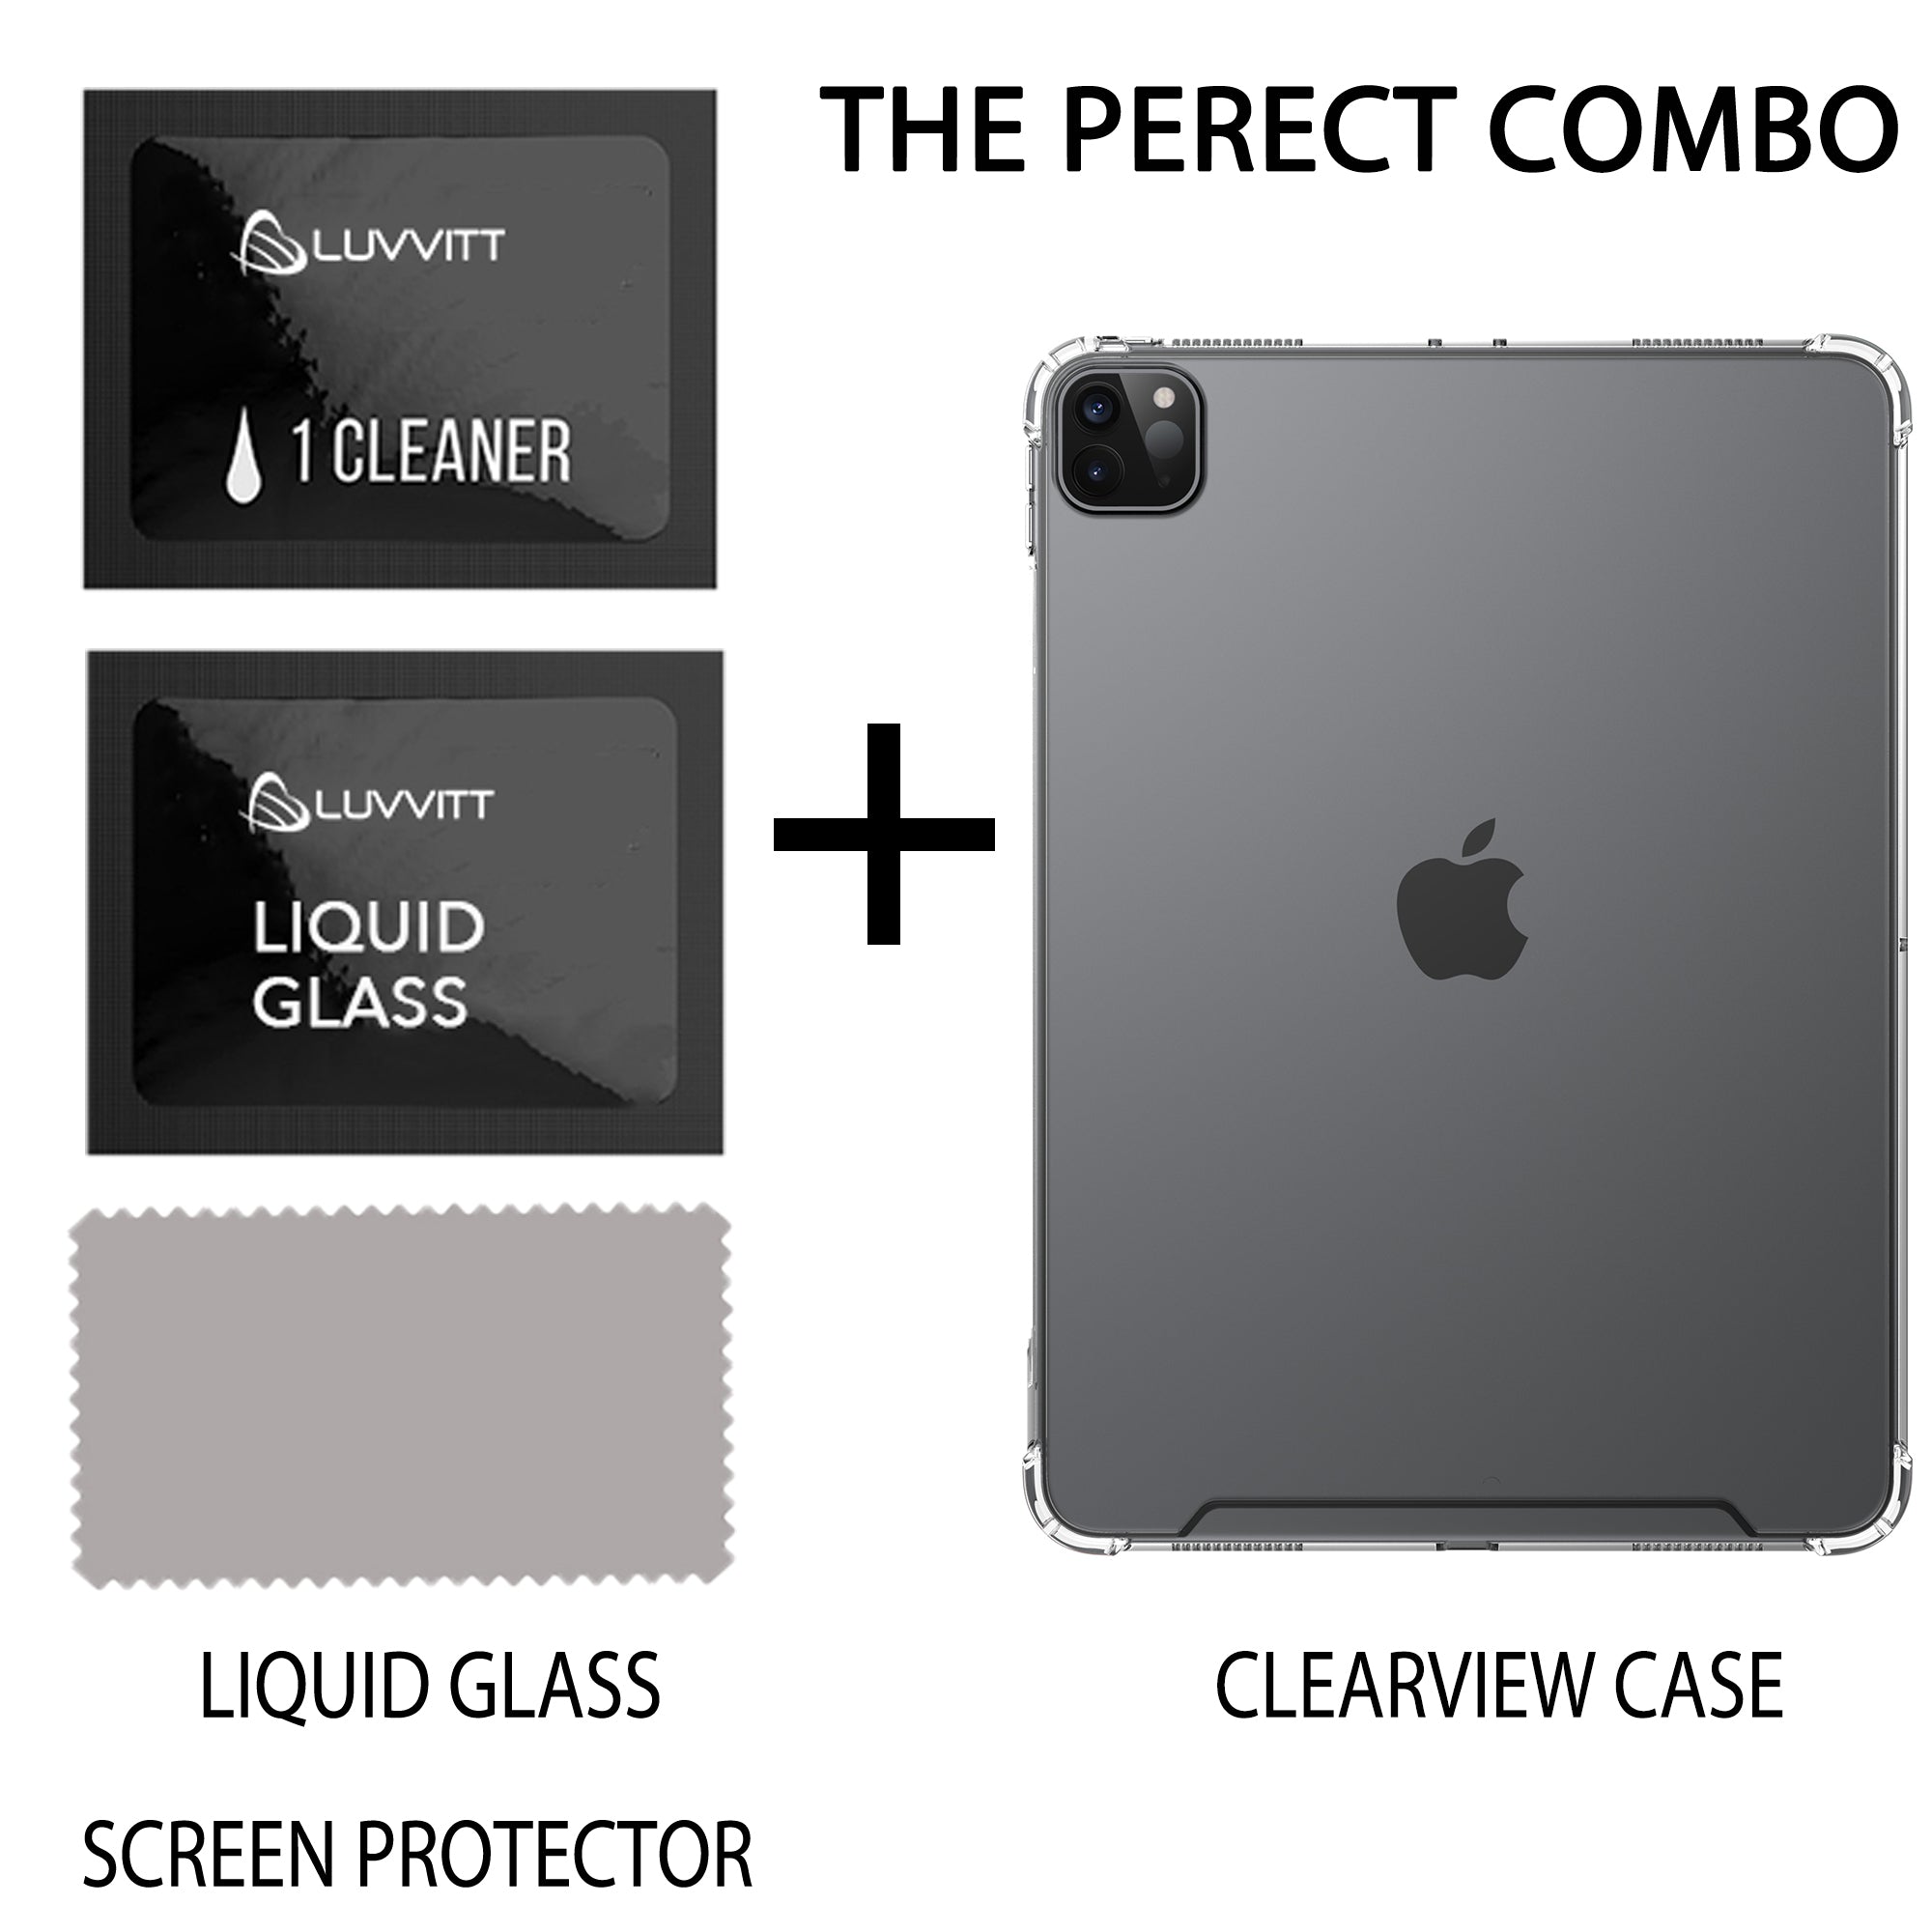 iPad Pro 11 Case 2020 Luvvitt Clear View Case and Liquid Glass Screen Protector